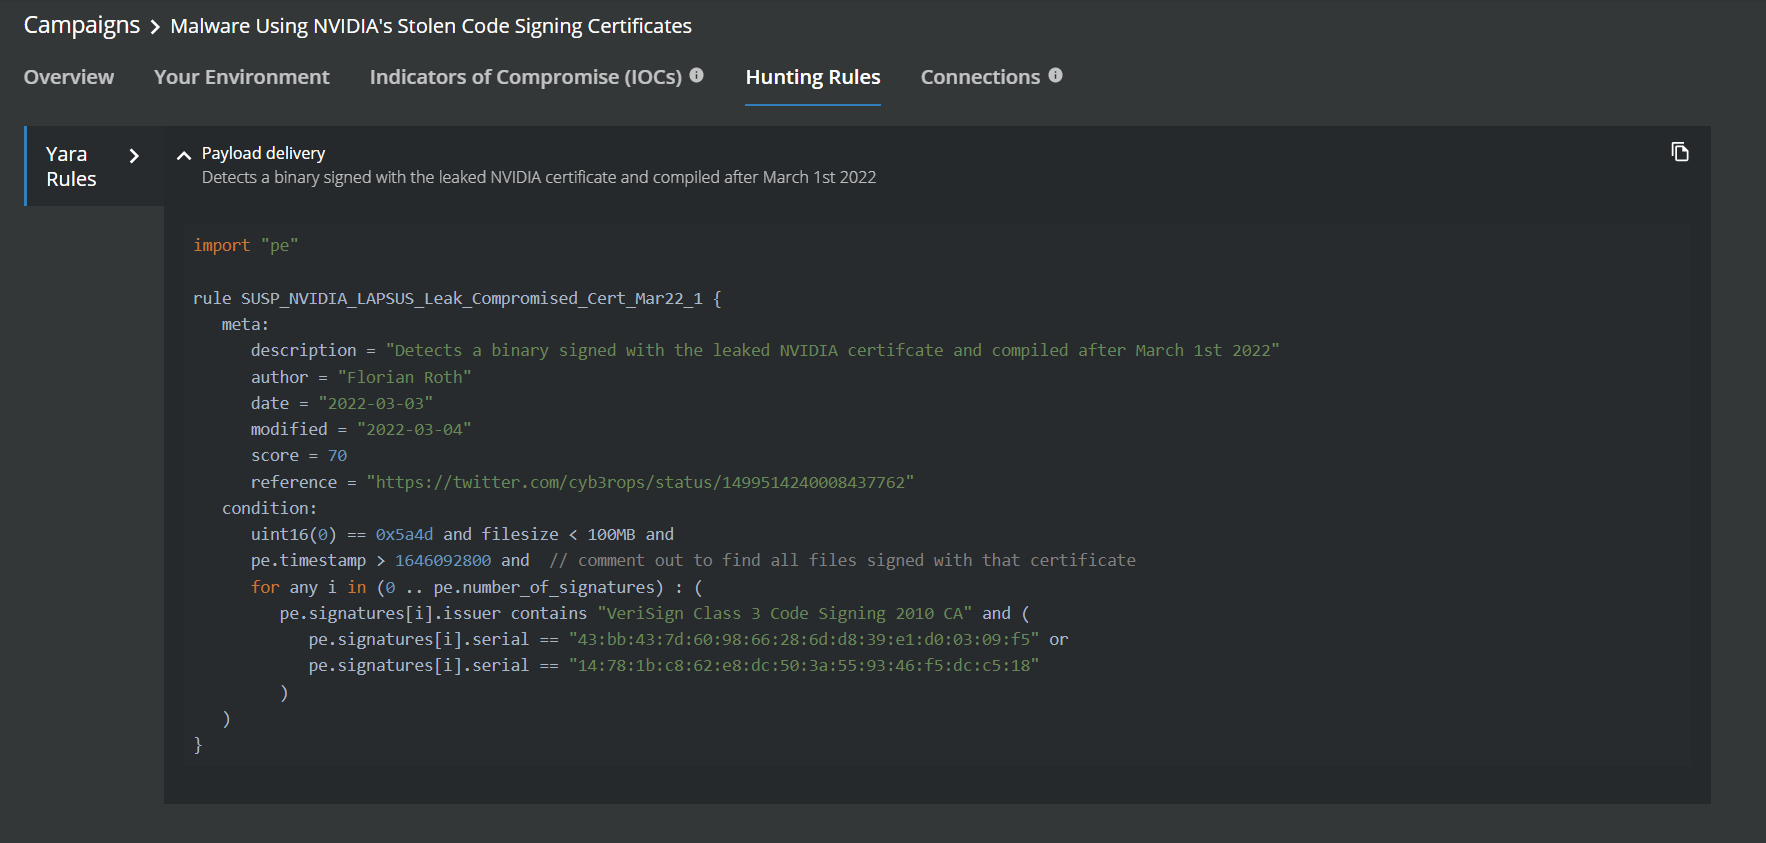 Figure 5. Yara Hunting Rules for malware using stolen NVIDIA Certificates